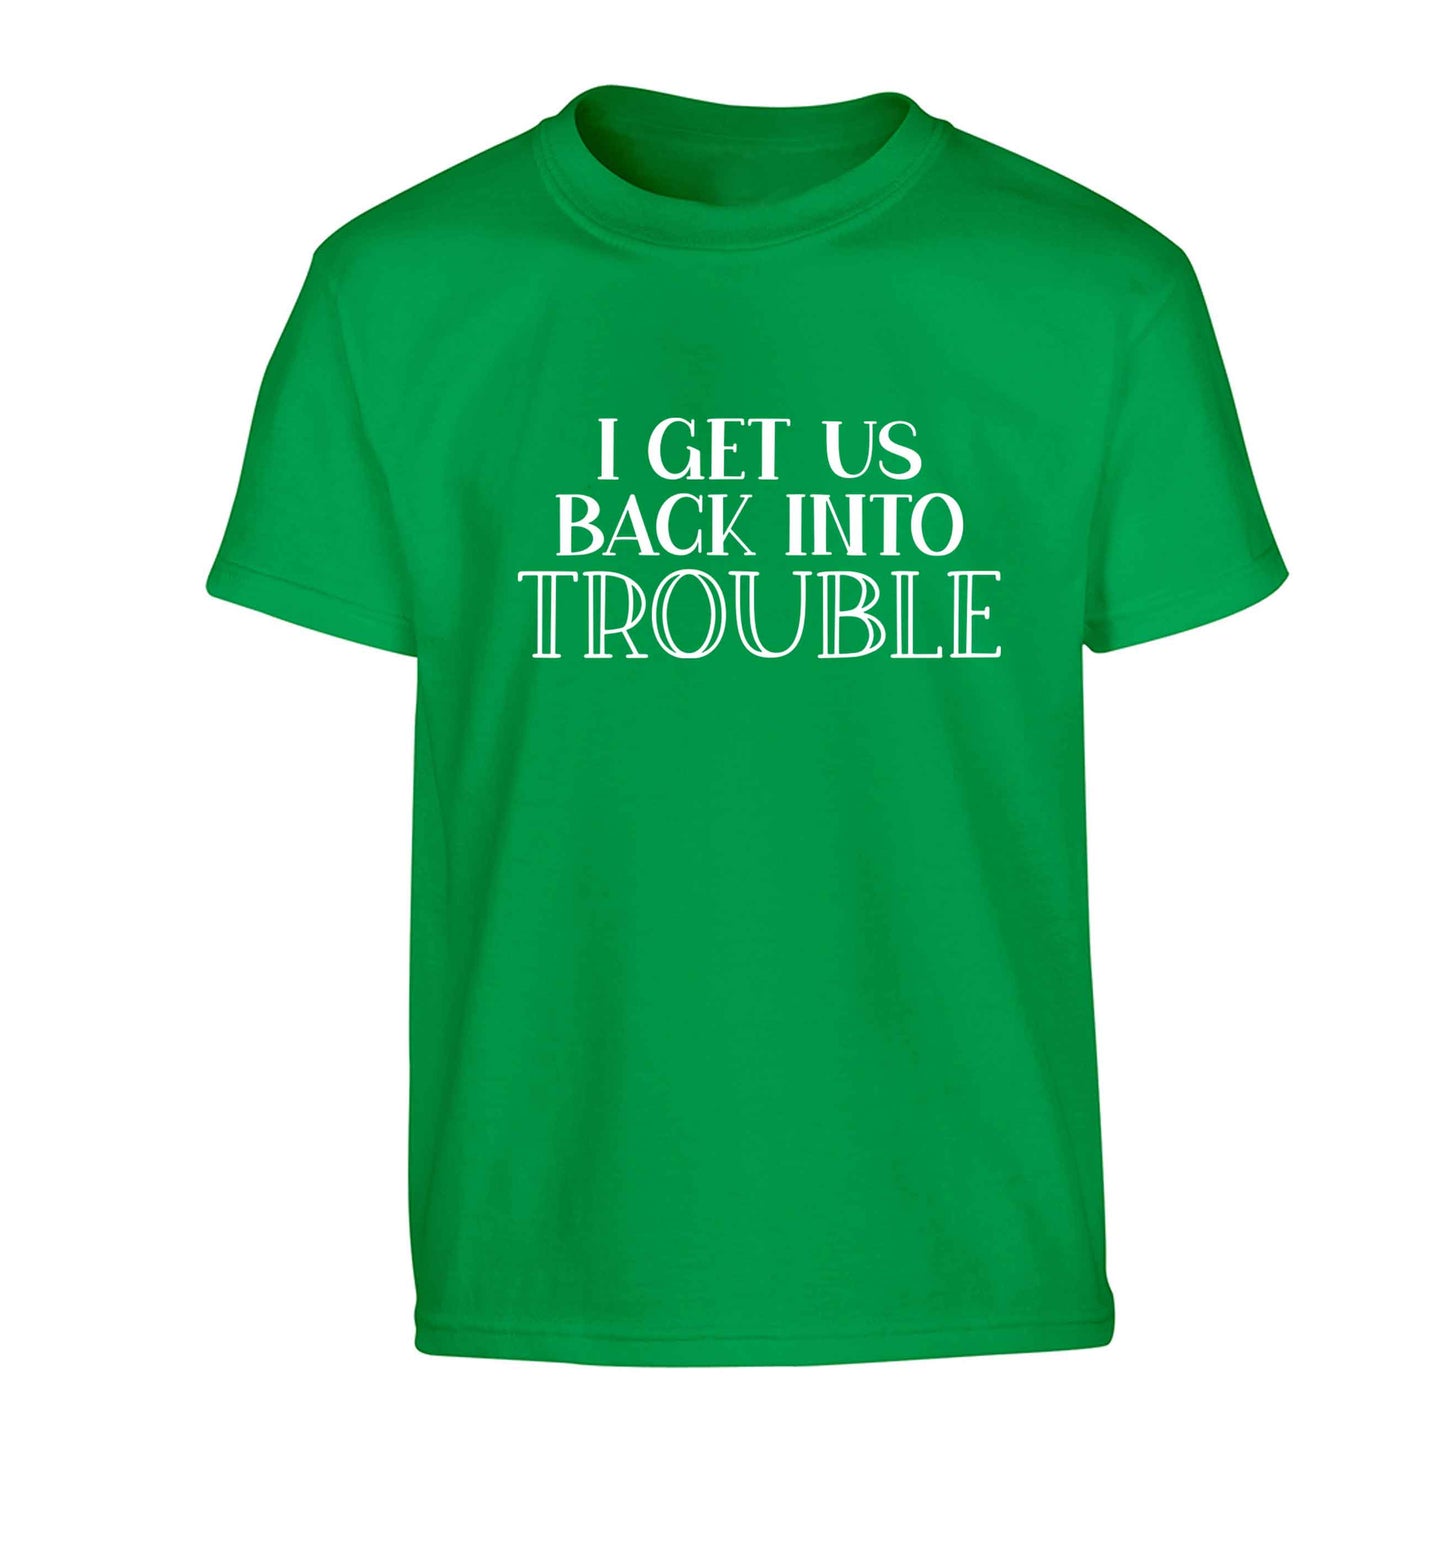 I get us back into trouble Children's green Tshirt 12-13 Years